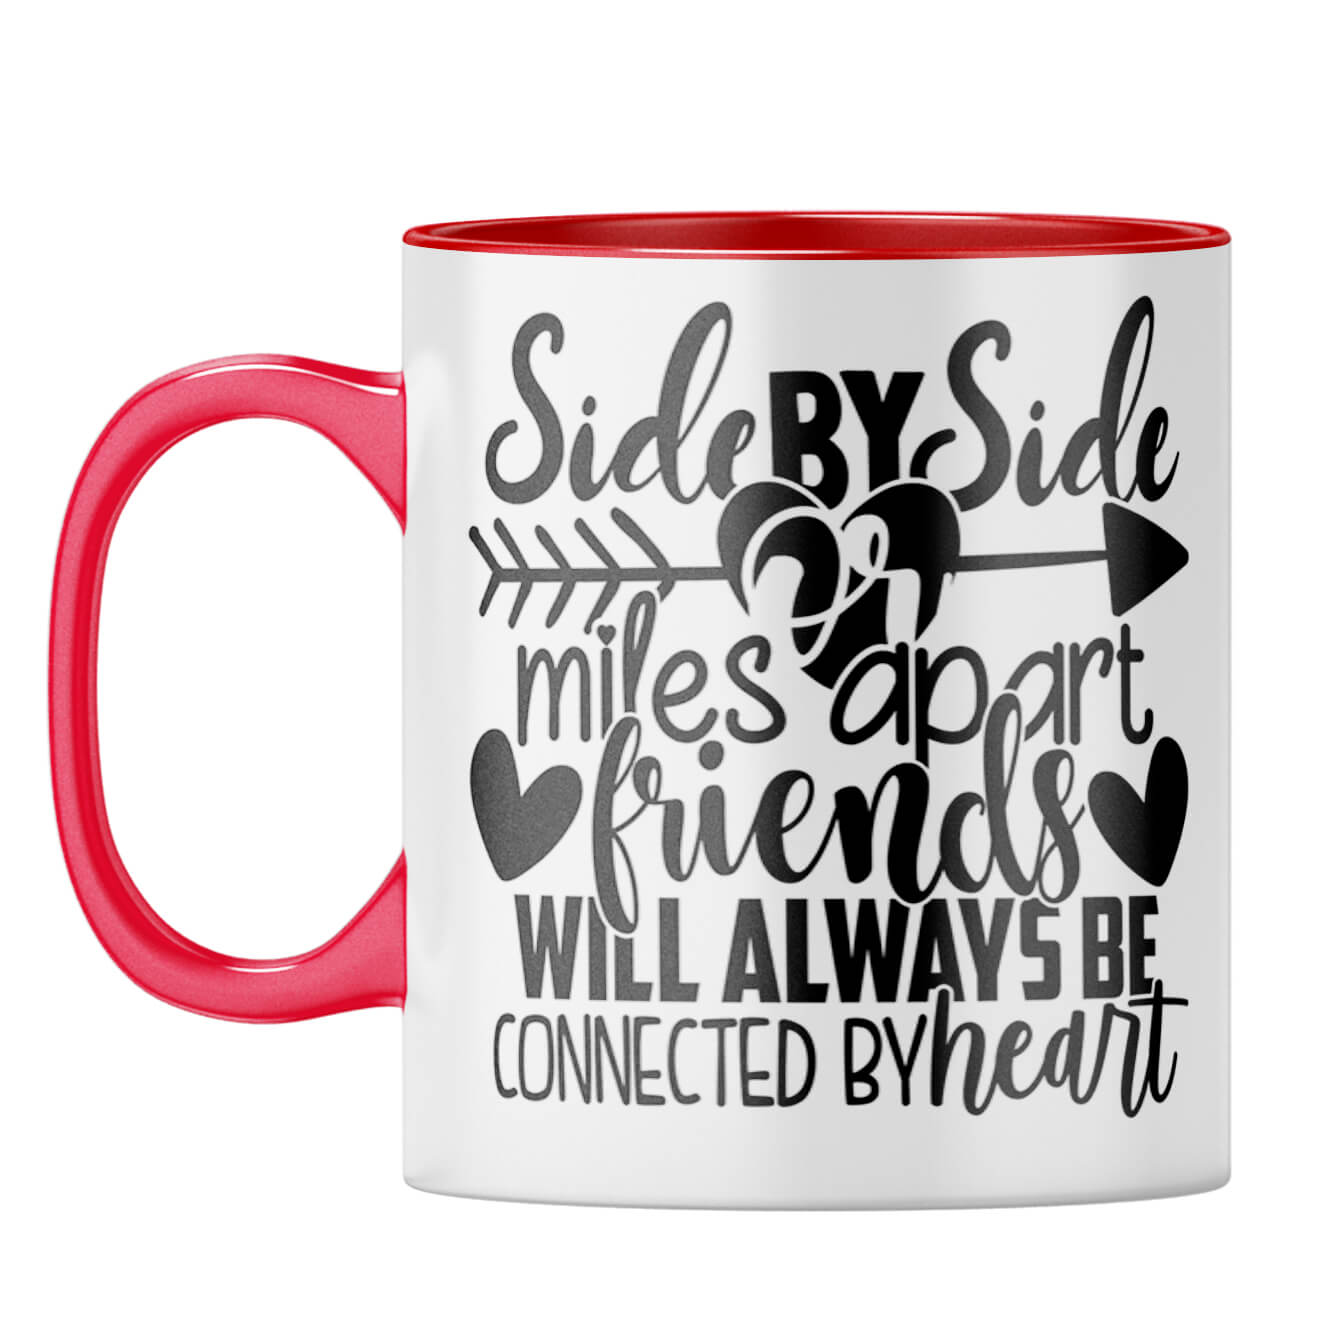 Friends Connected By Heart Coffee Mug Red